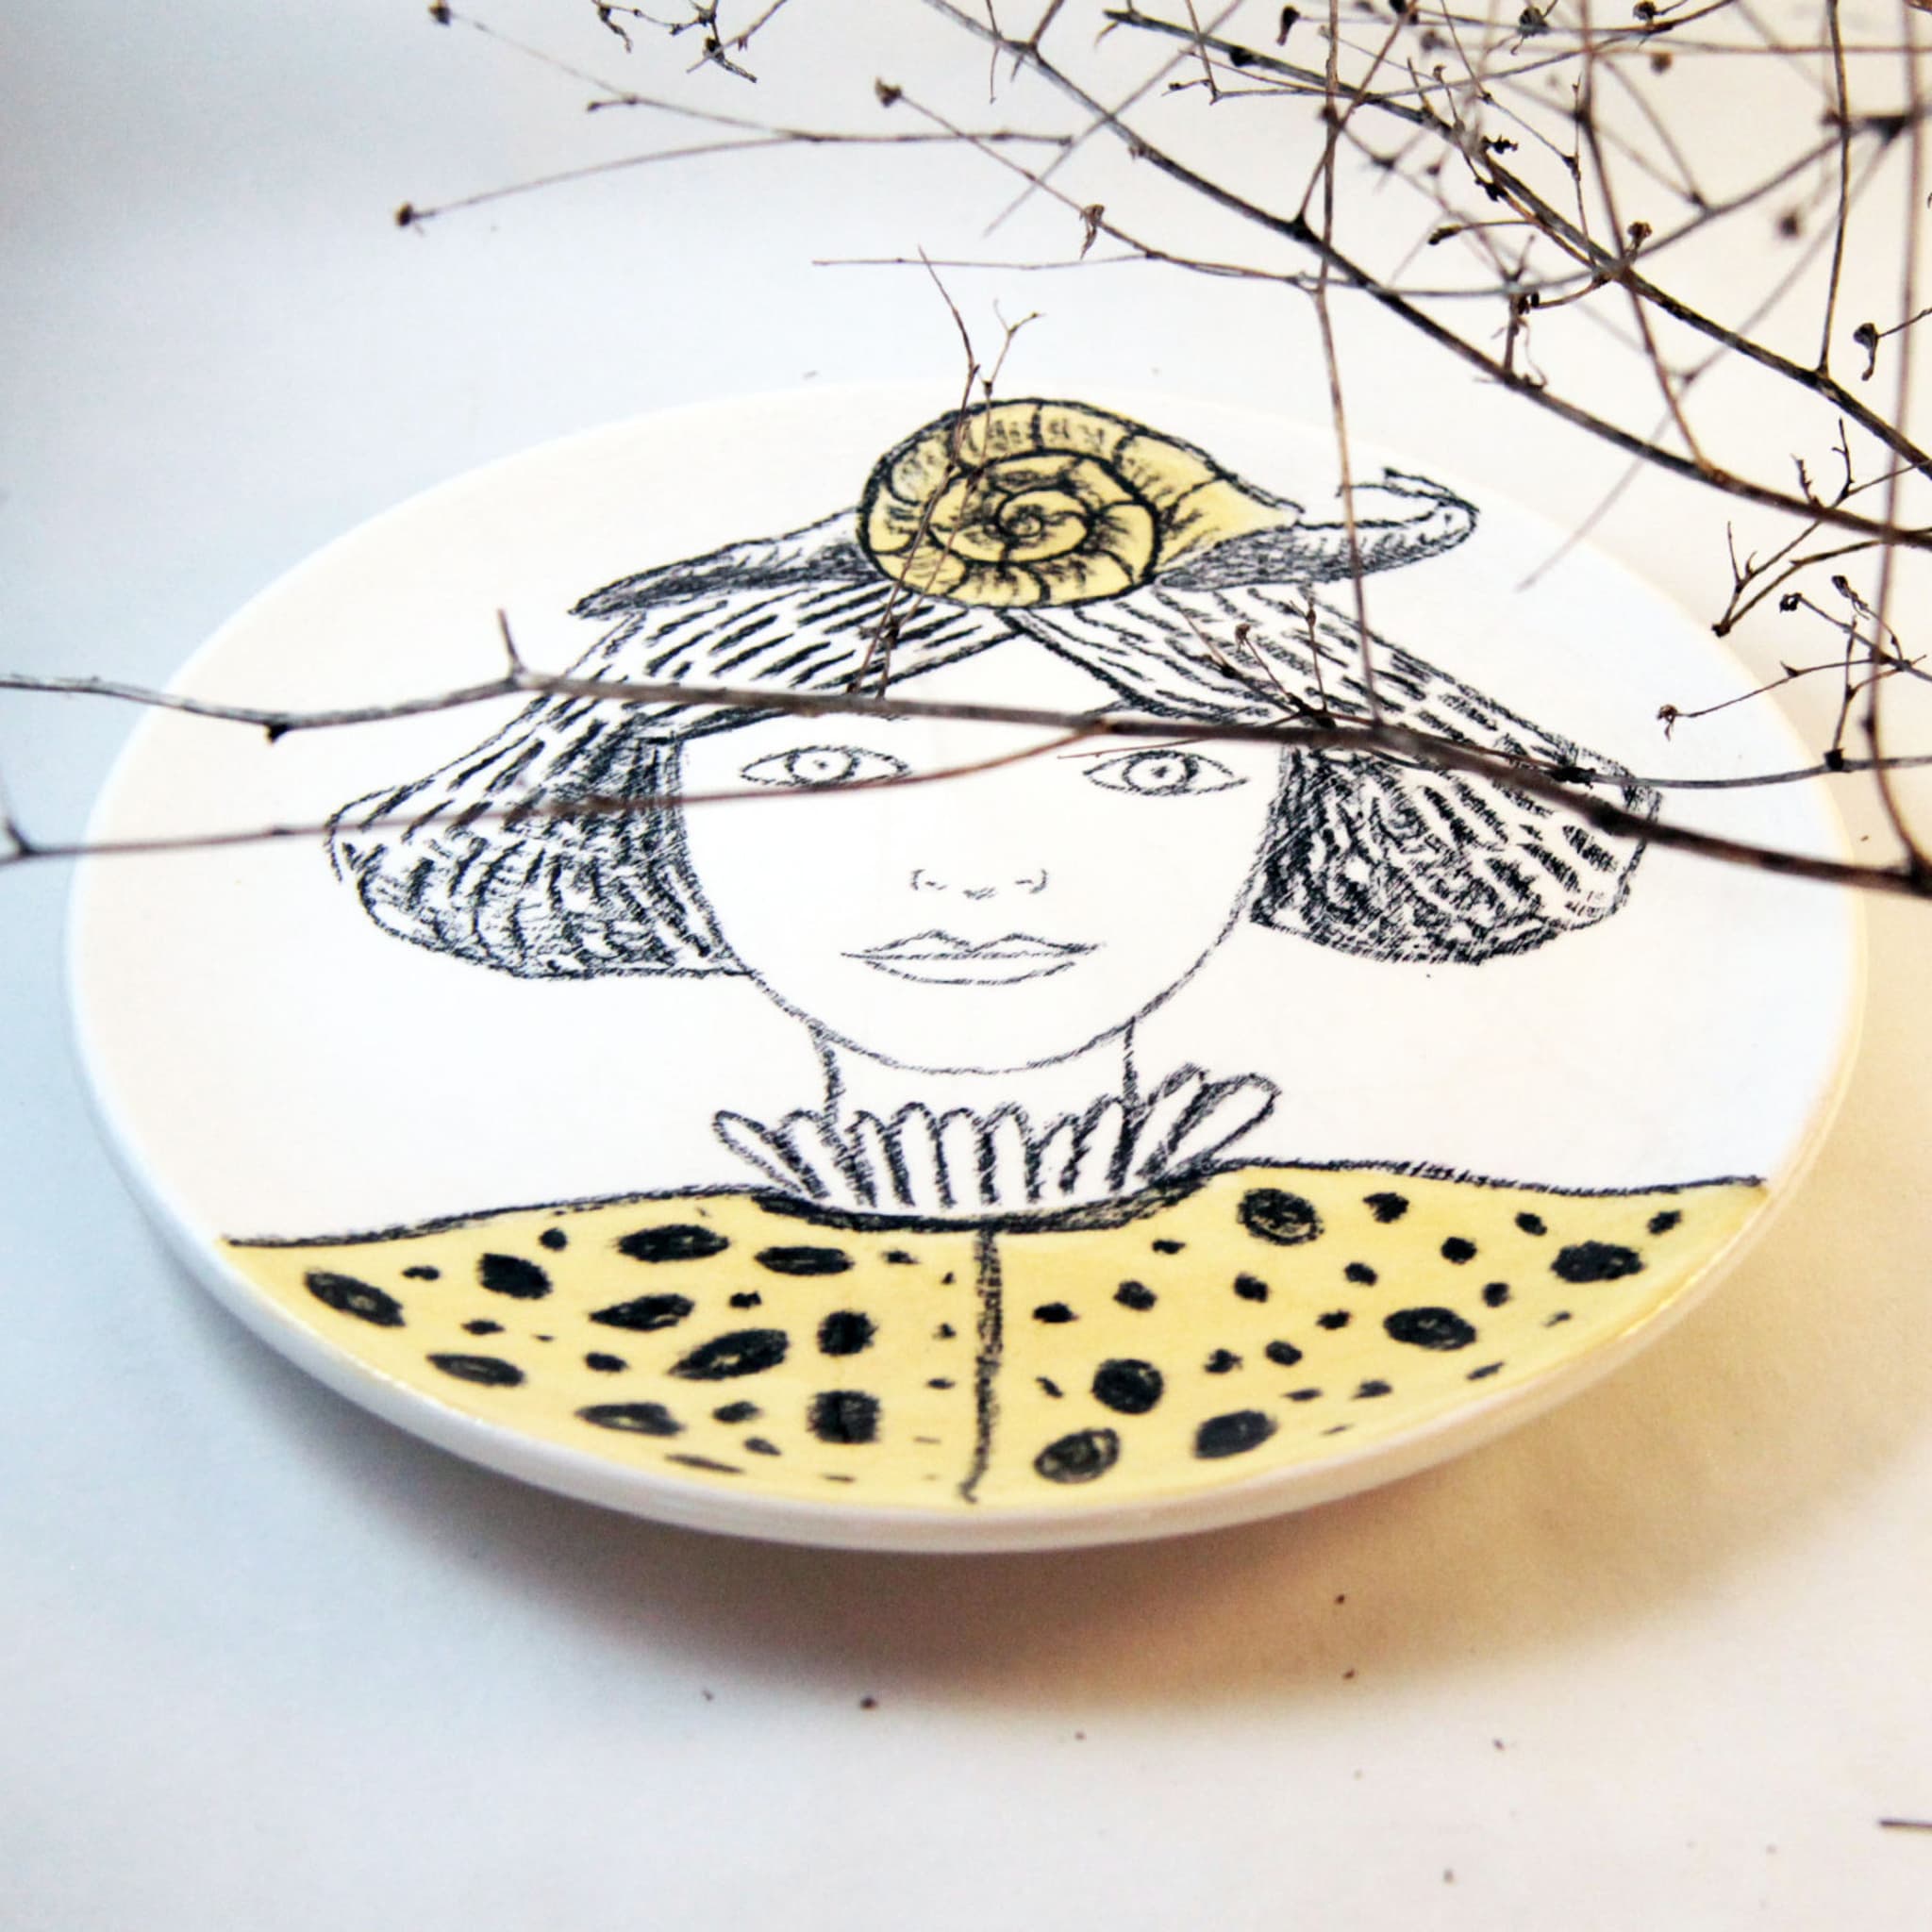 Woman with Snail Decorative Plate - Alternative view 1